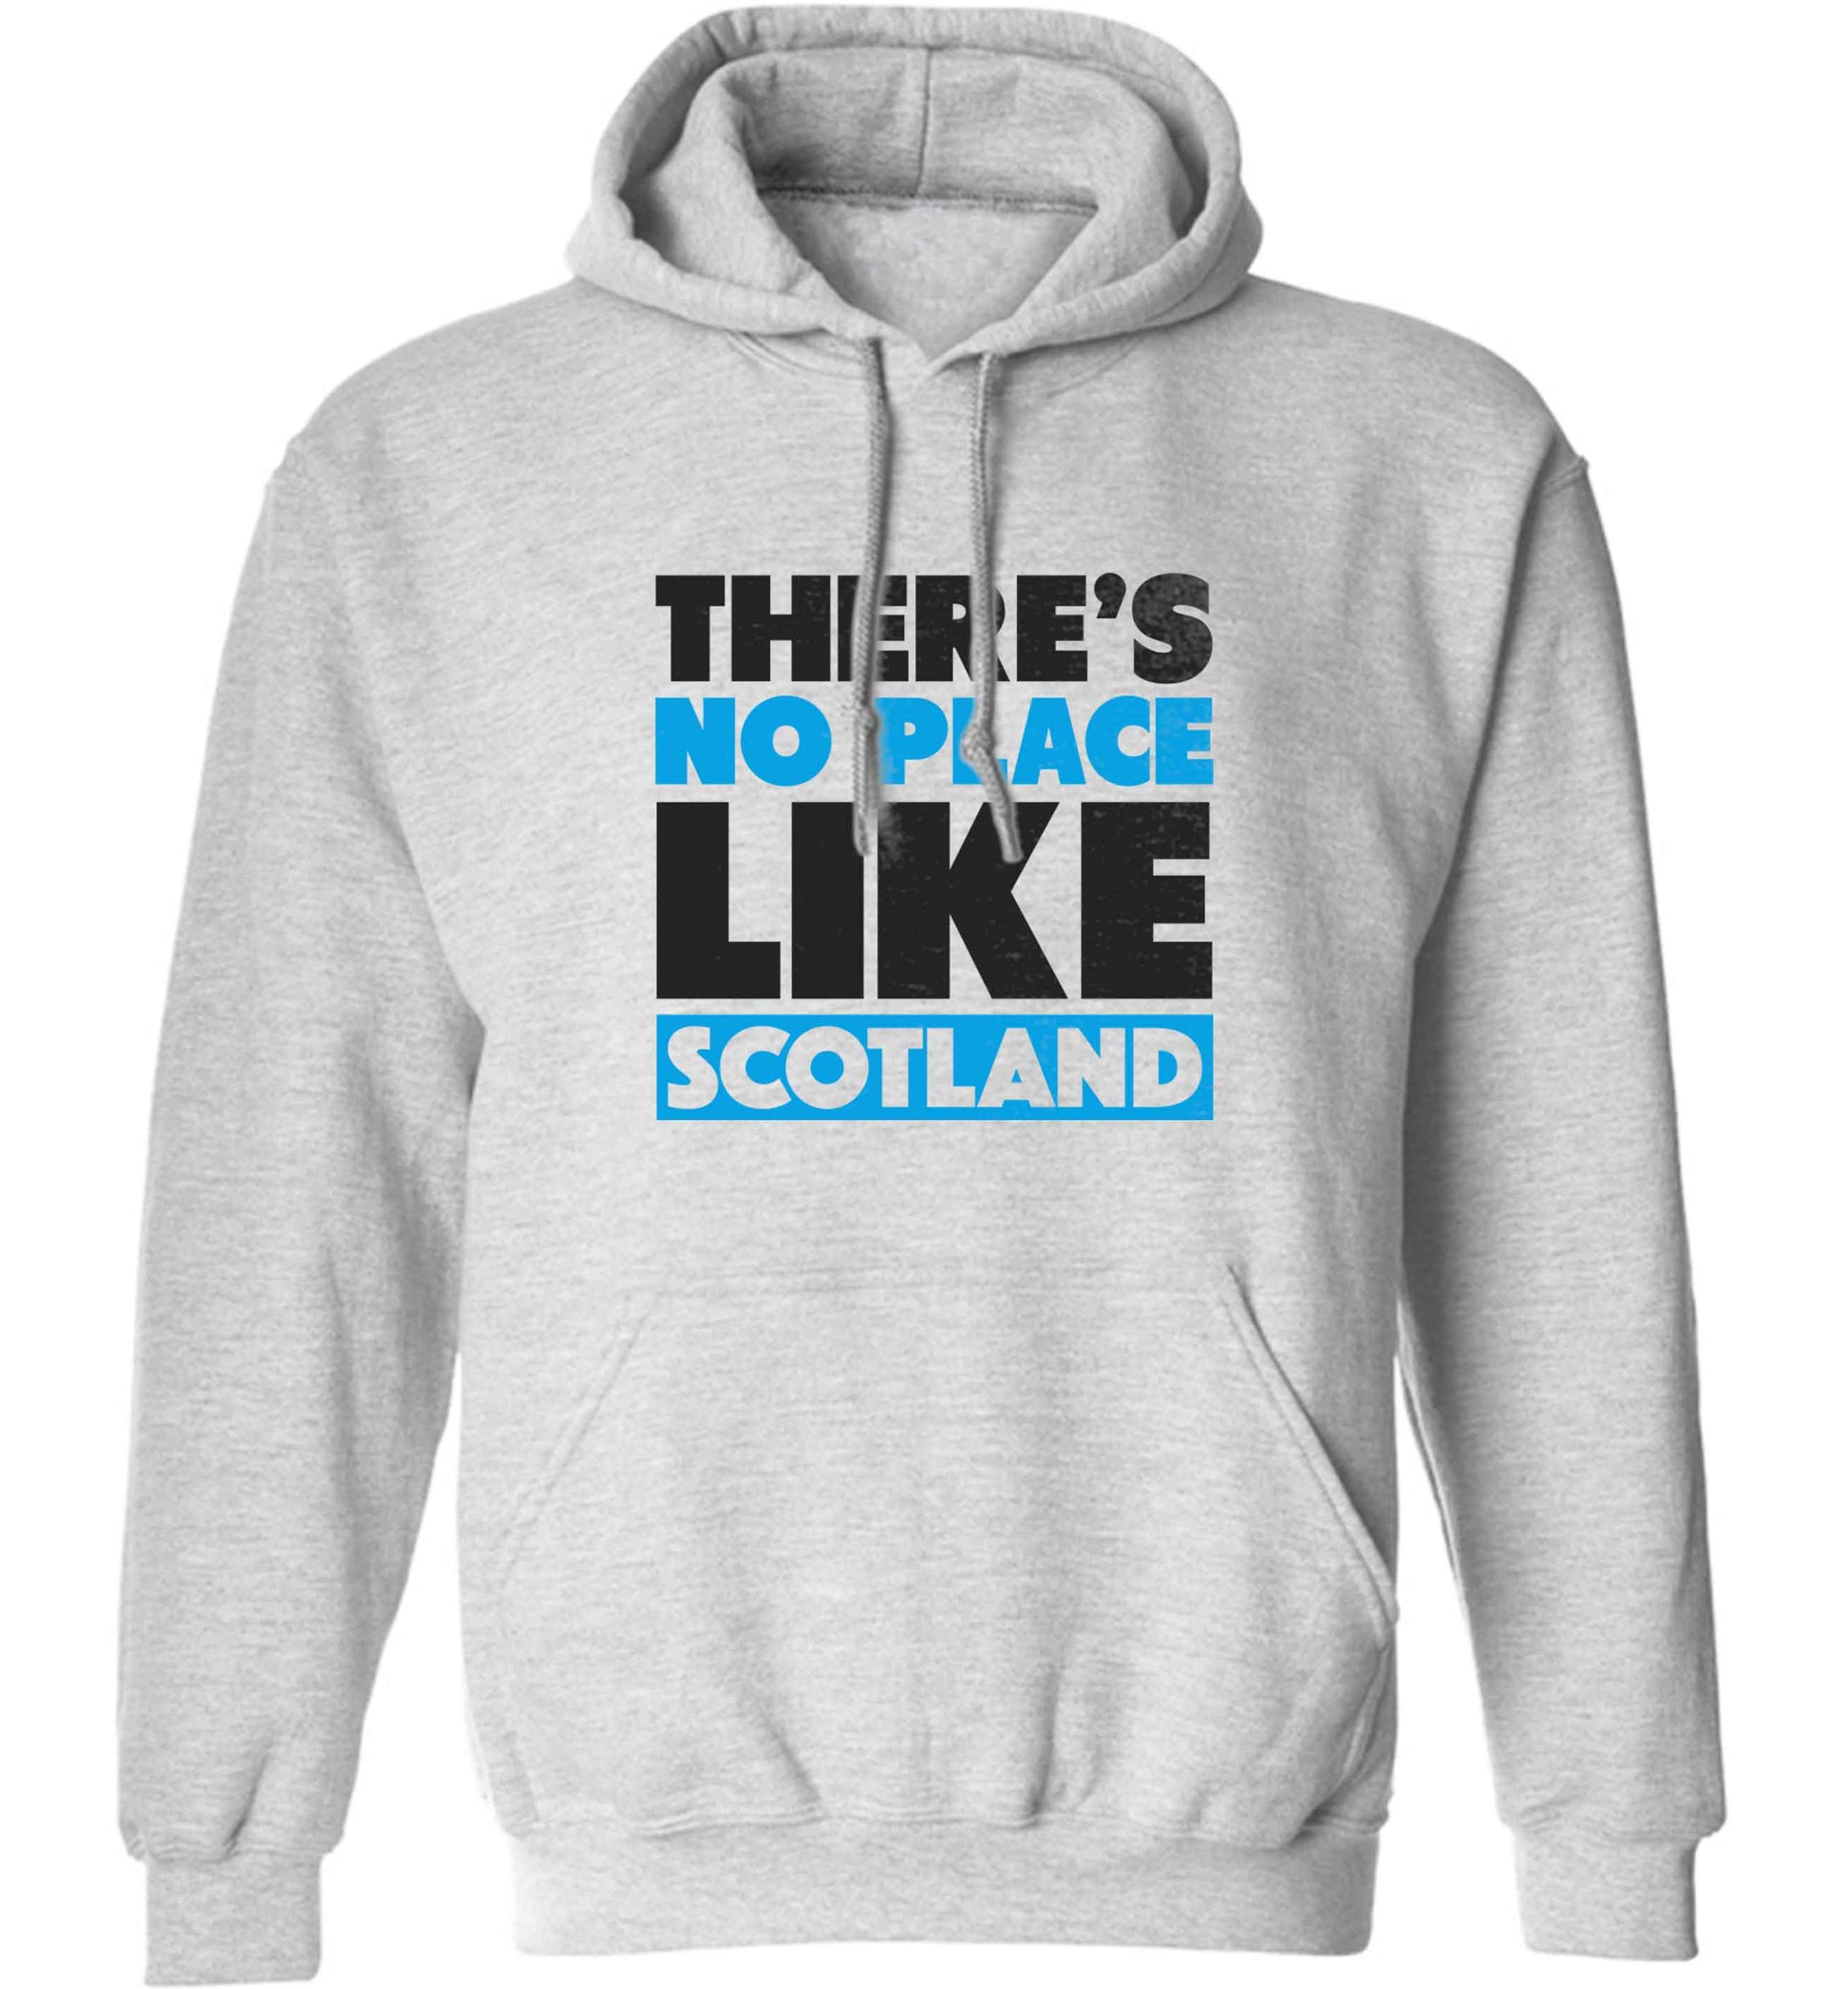 There's no place like Scotland adults unisex grey hoodie 2XL